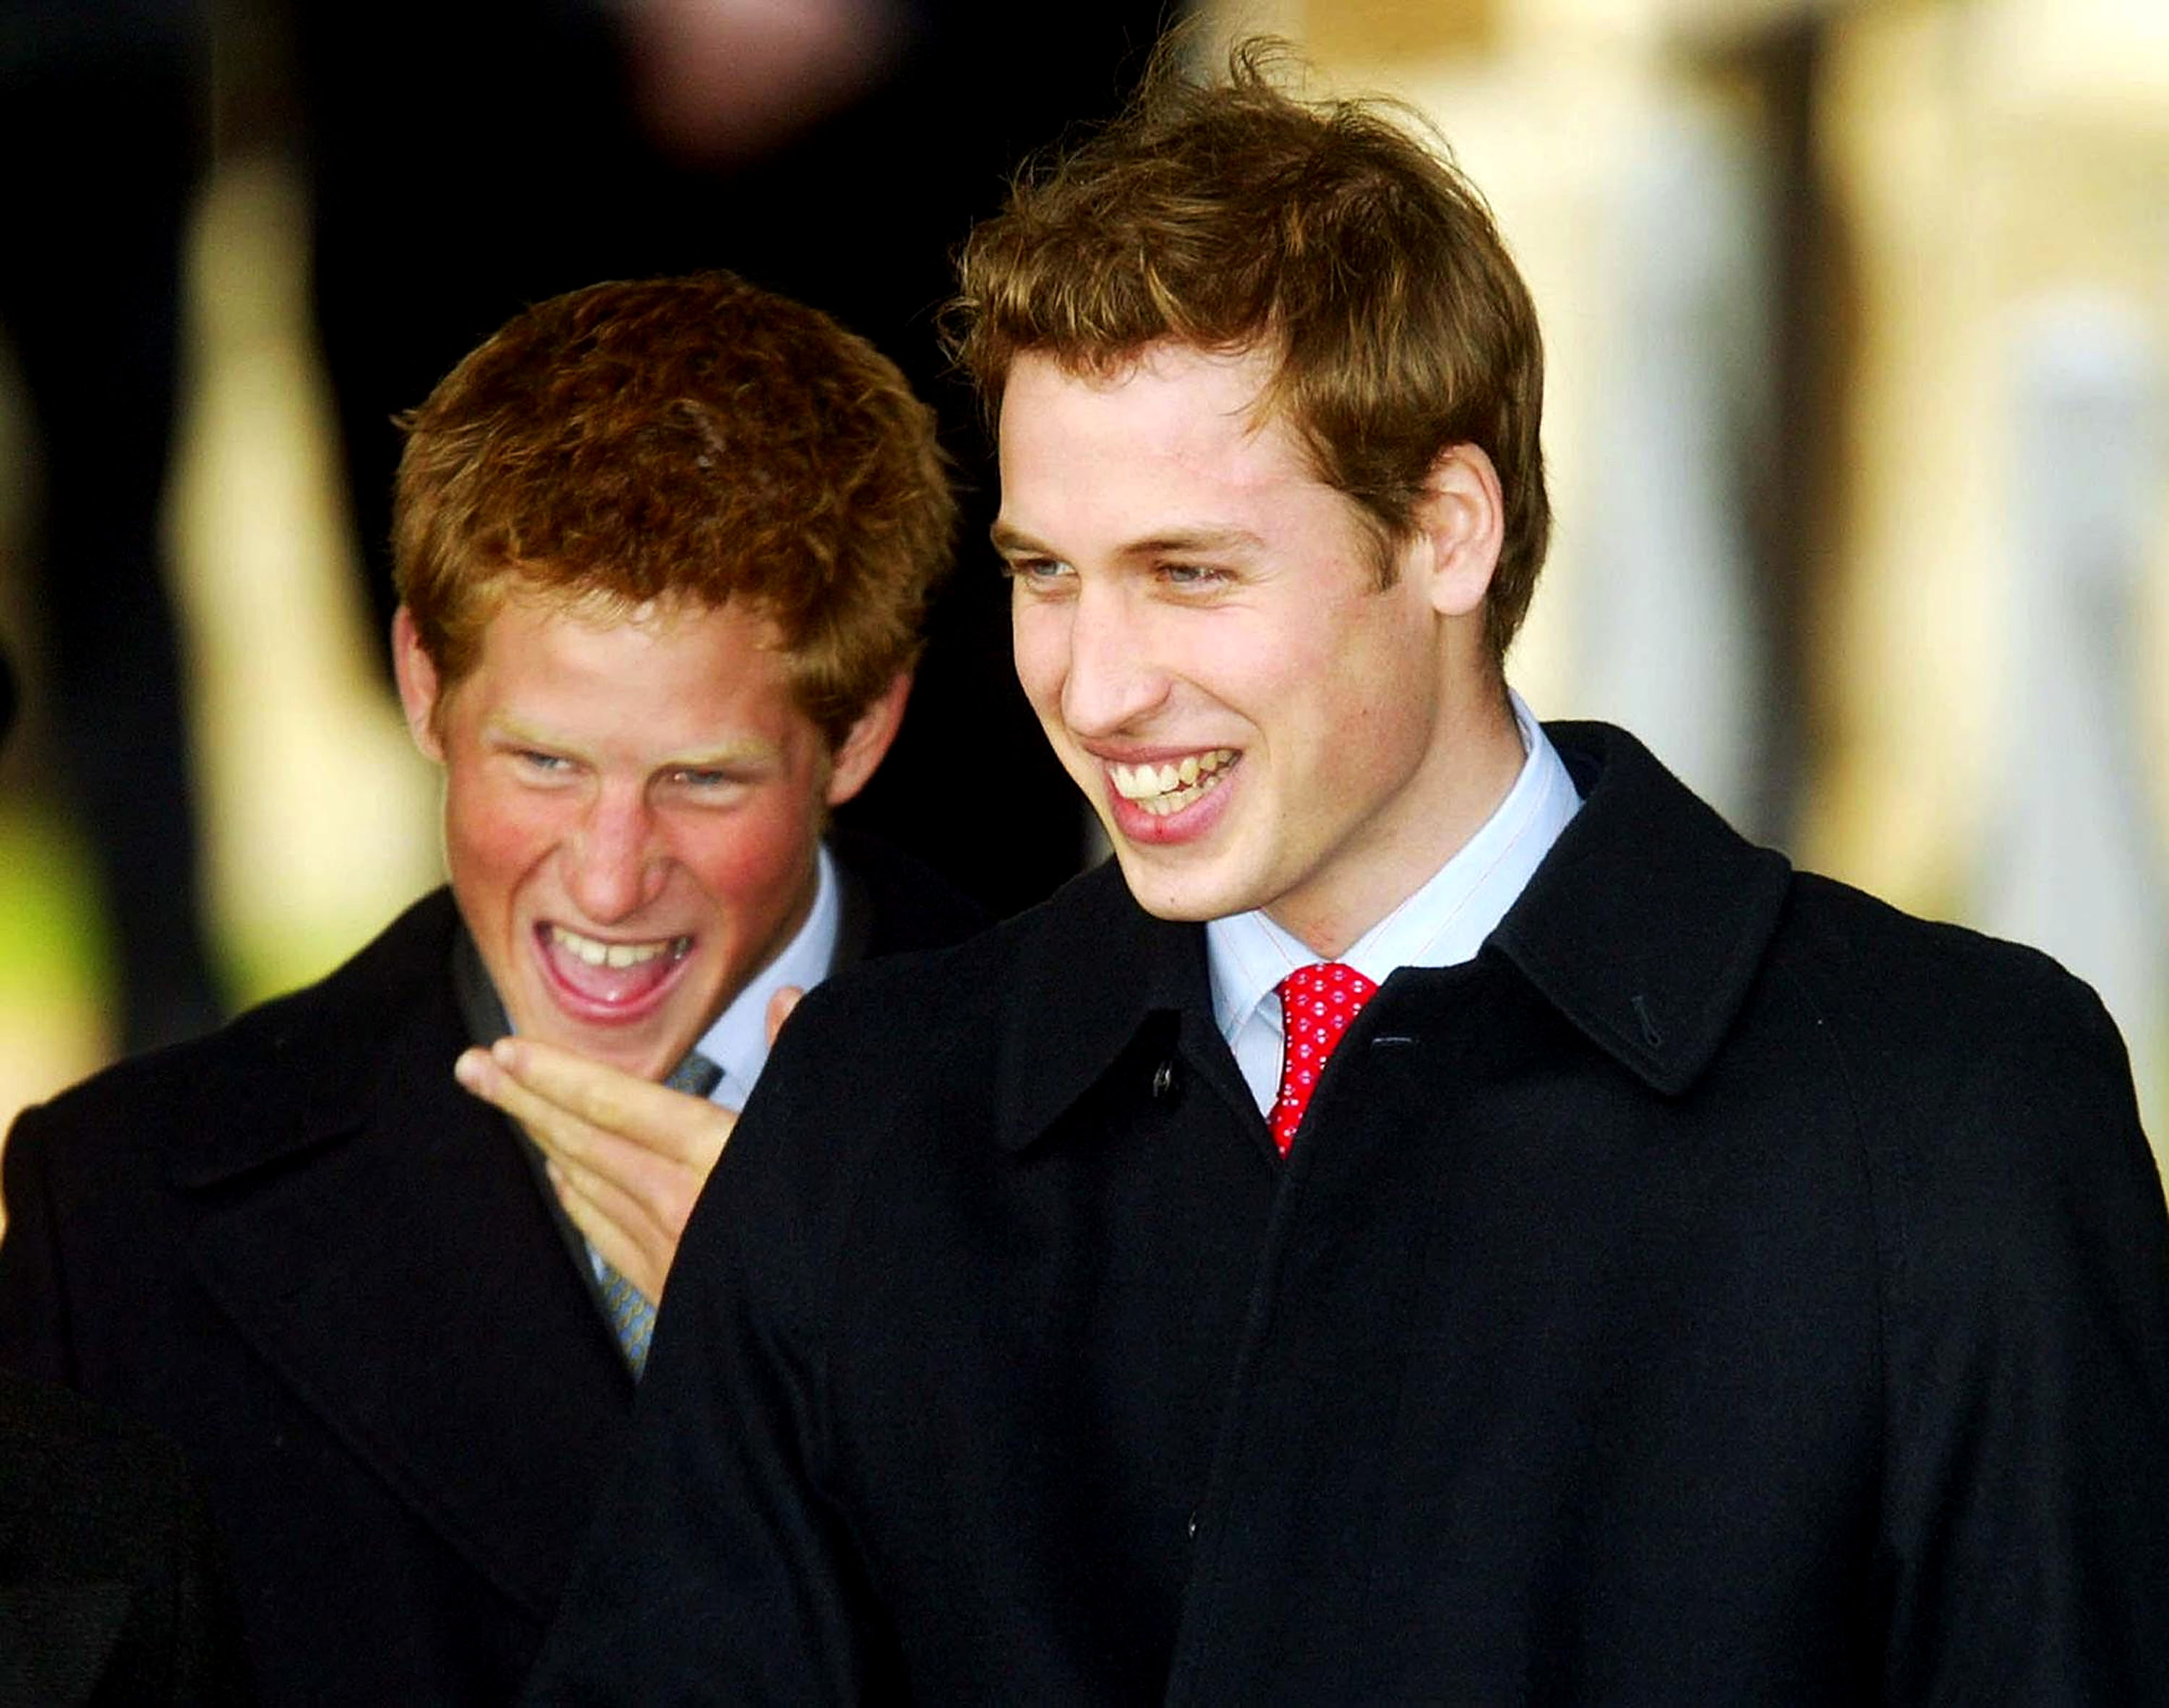 HRH Prince Harry (L) and HRH Prince William leave along with other members of the Royal family after attending a Christmas Day service St. Mary Magdelene Church on December 25, 2003 in Norfolk, England. (Getty Images—2003 Getty Images)